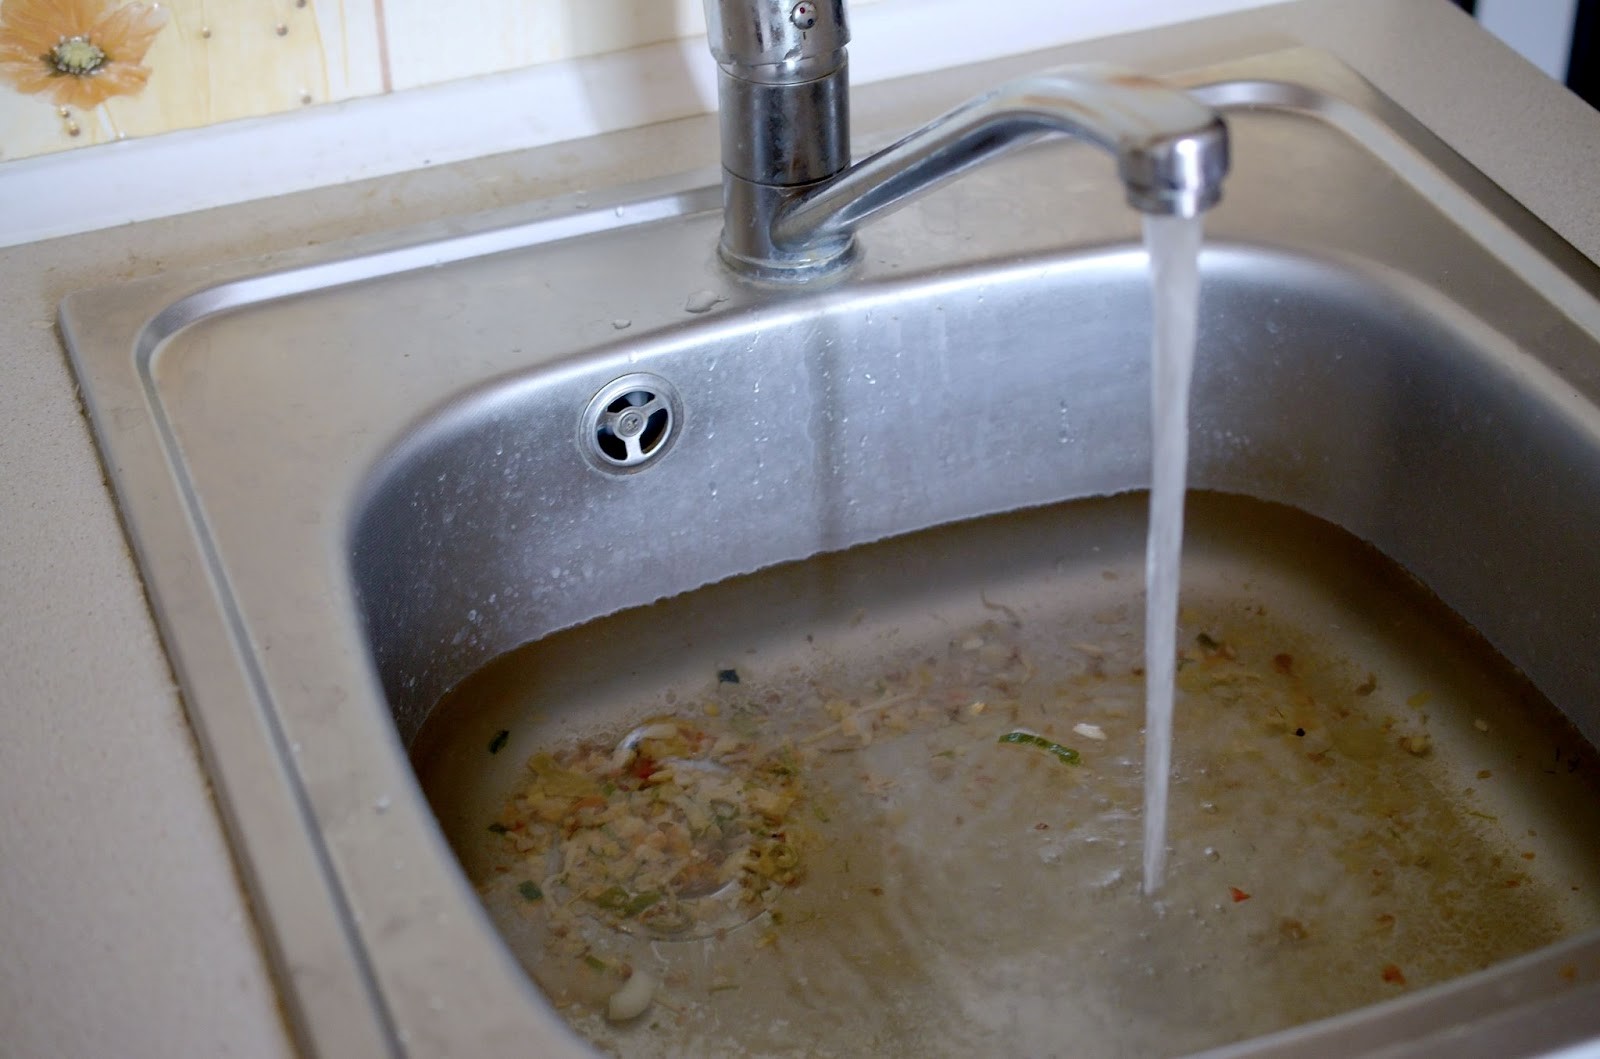 Too much food in the garbage disposal has caused a clogged kitchen sink